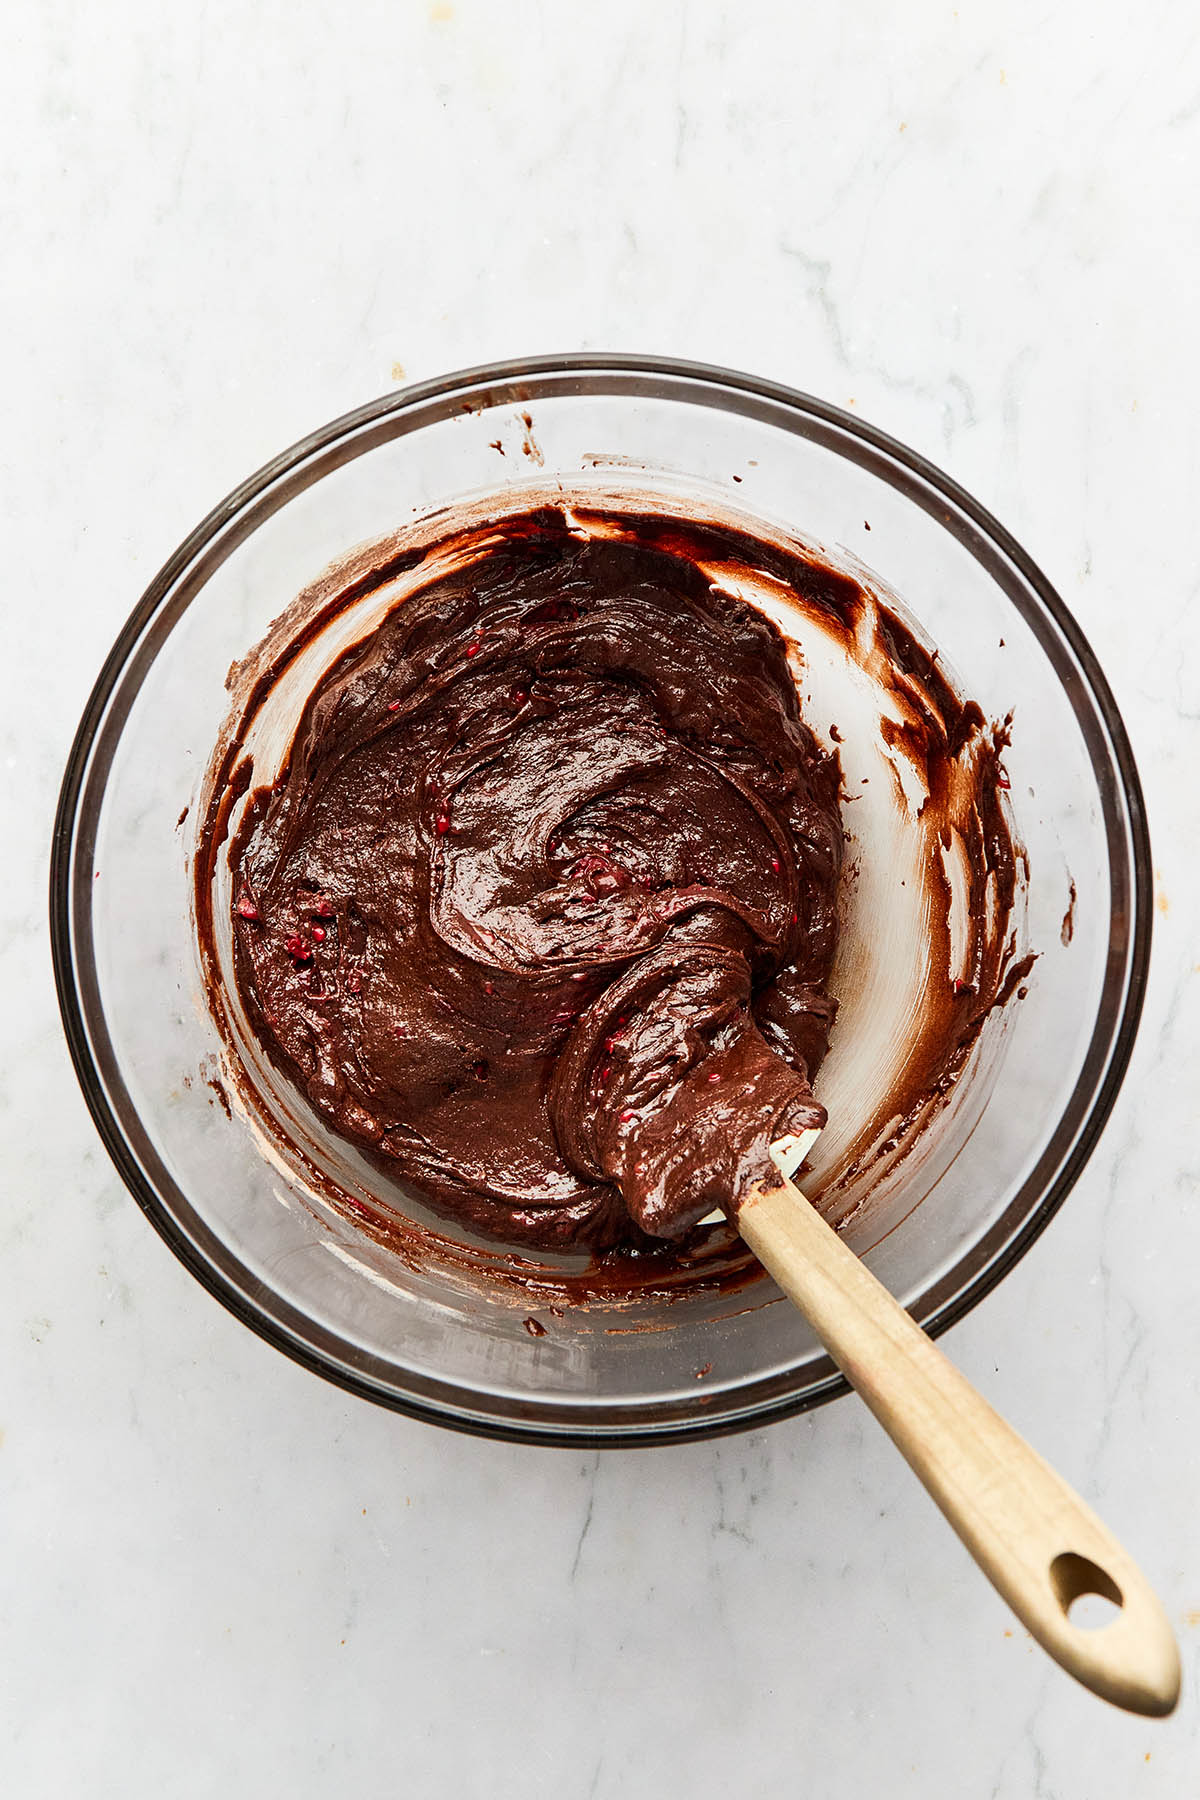 Chocolate batter in a large glass bowl with a rubber spatula inside the bowl.